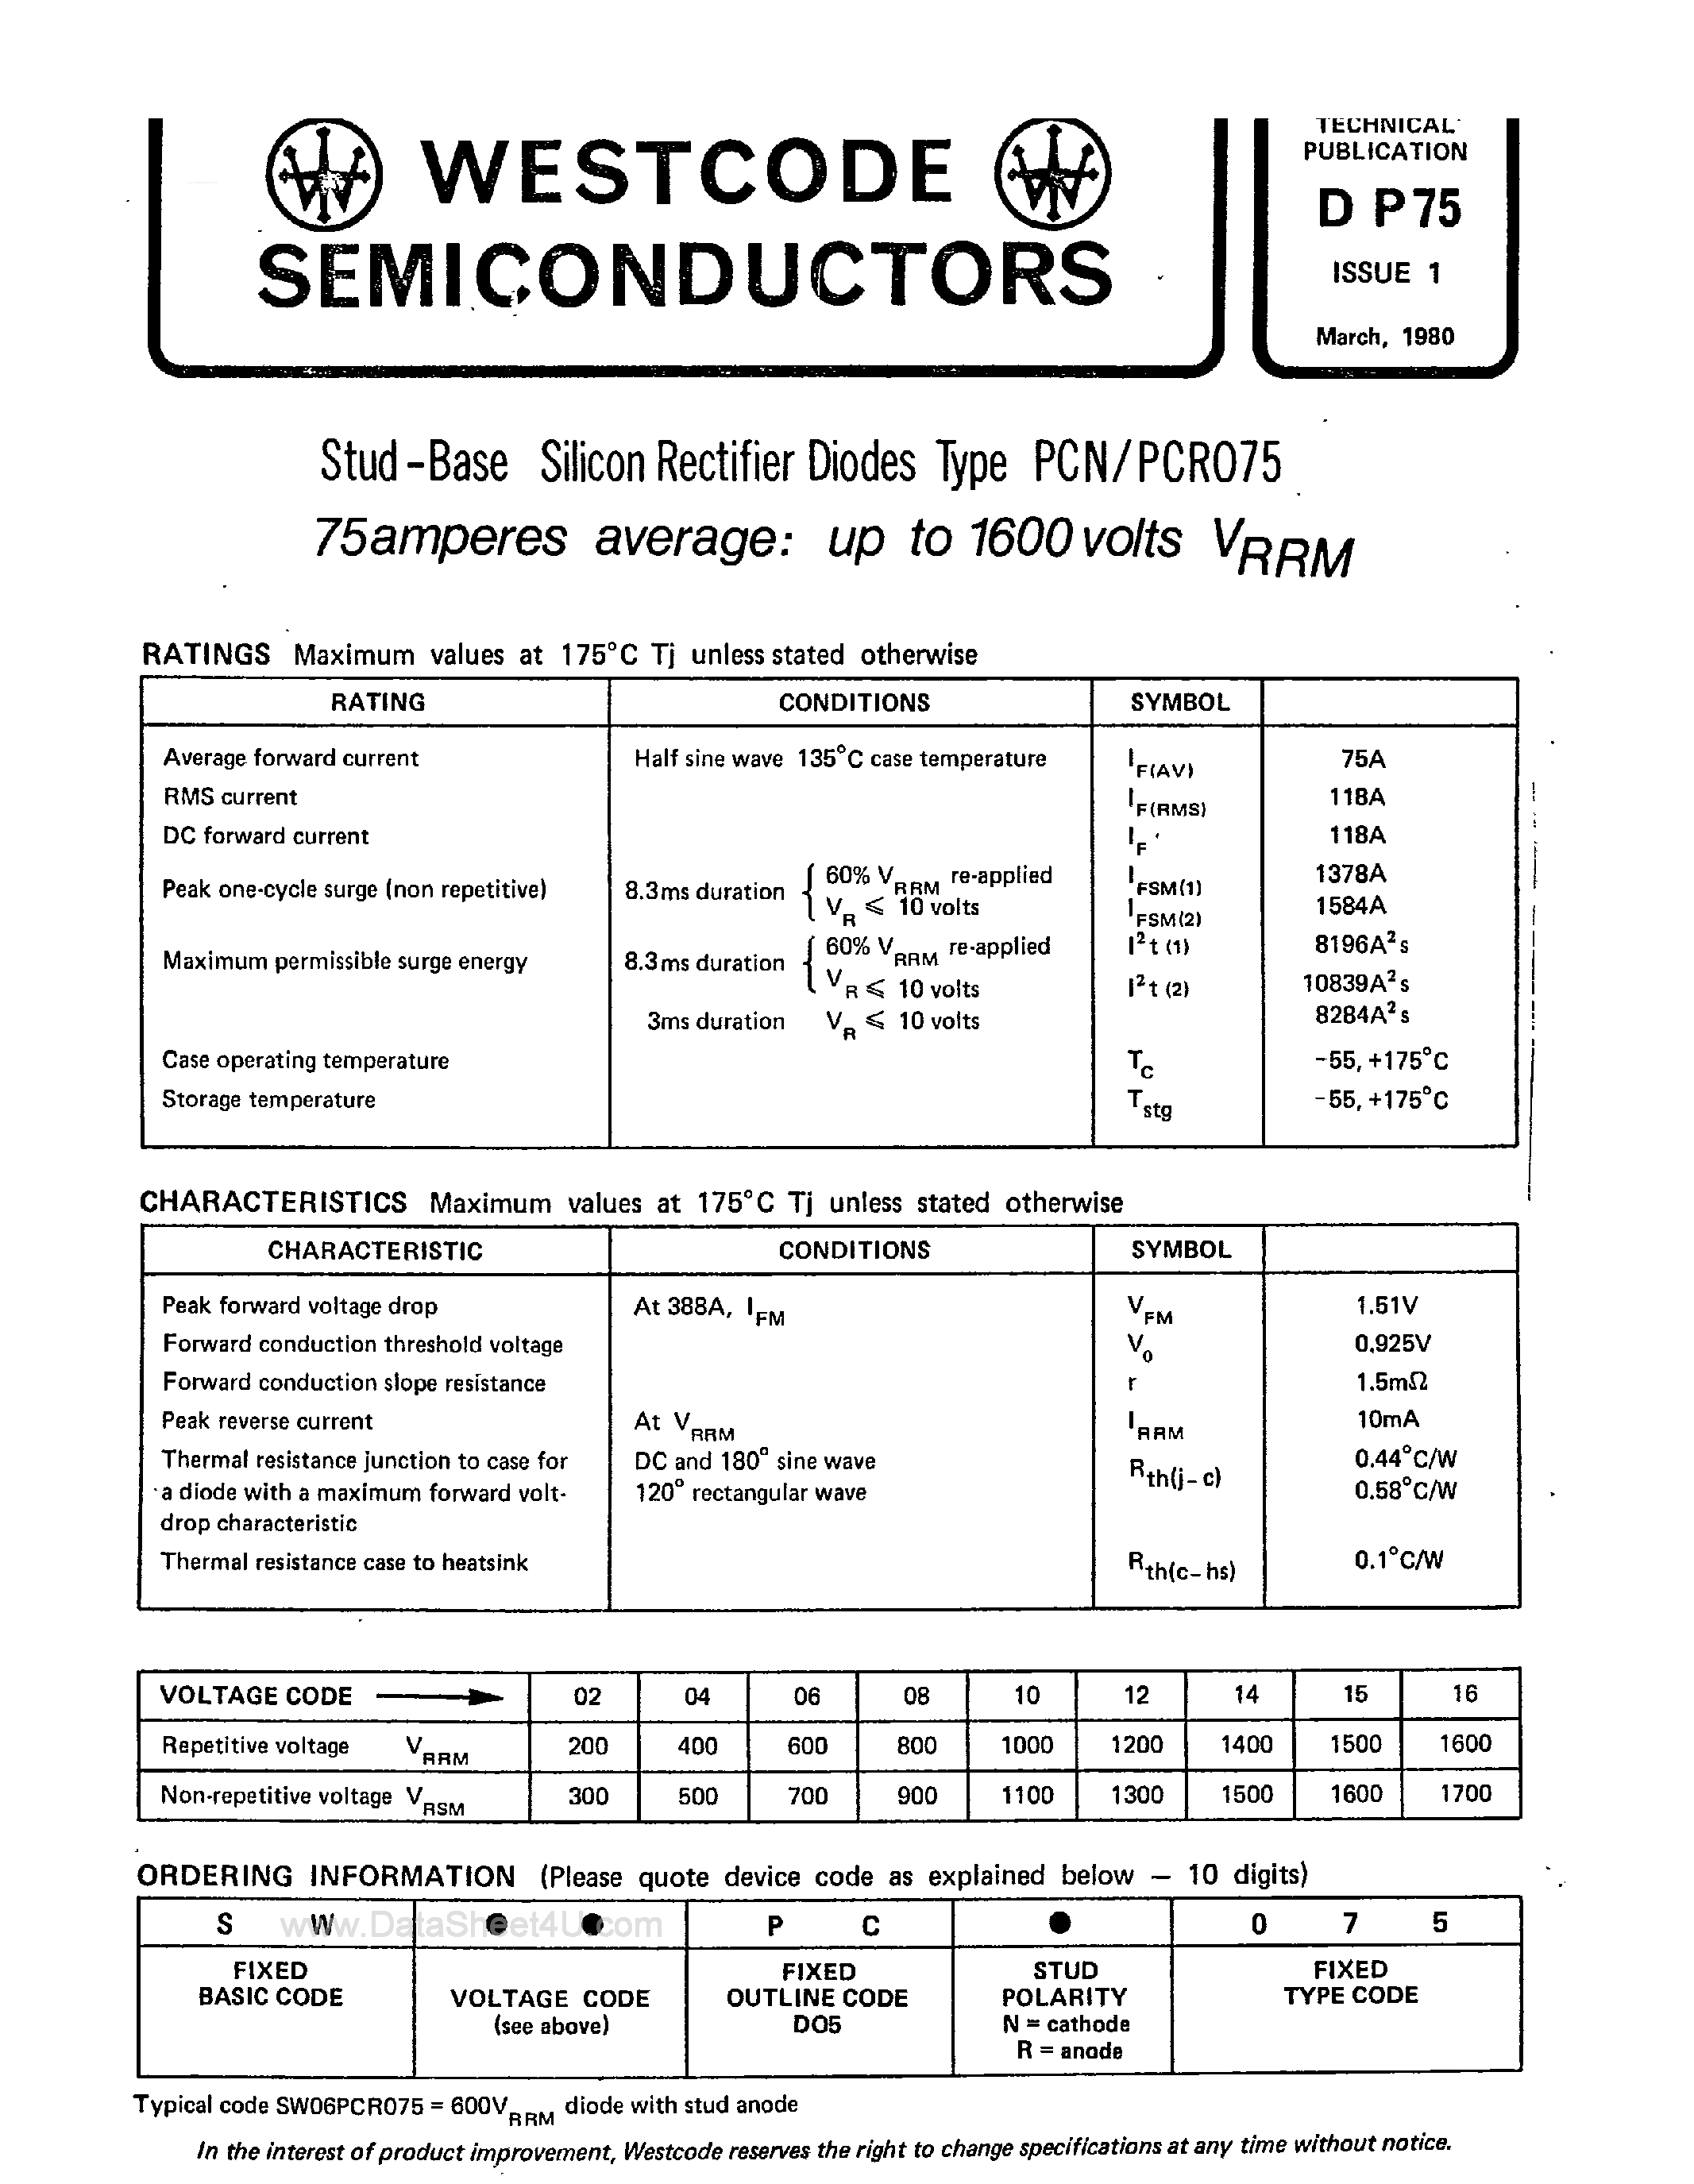 Datasheet SW15PCN075 - Stud Base Silicon Rectifier Diodes page 1